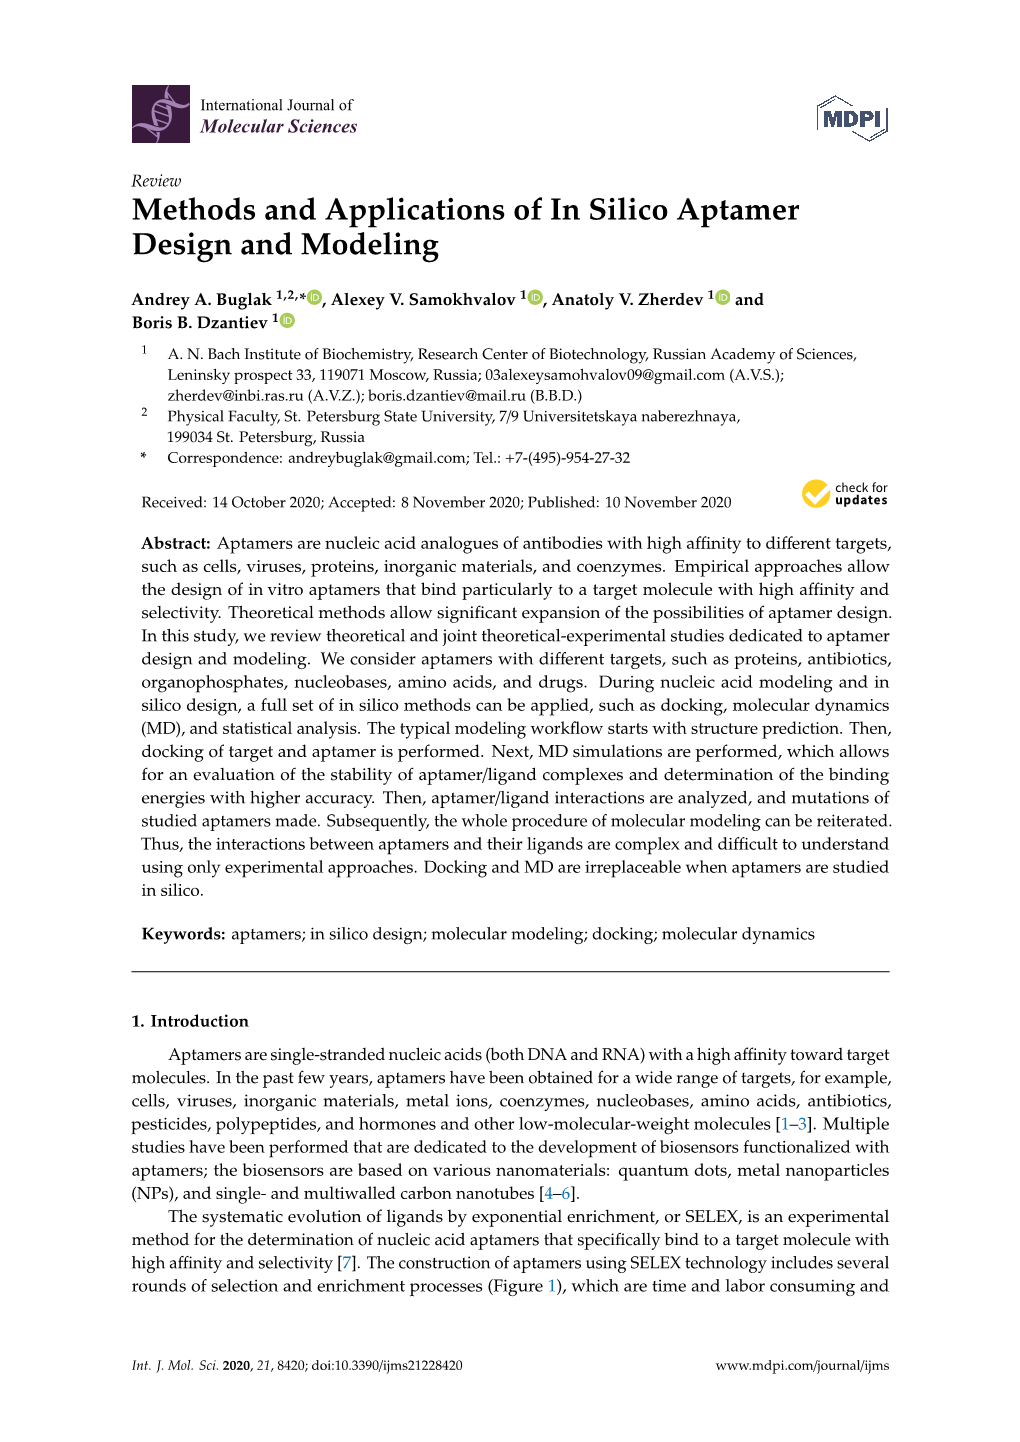 Methods and Applications of in Silico Aptamer Design and Modeling